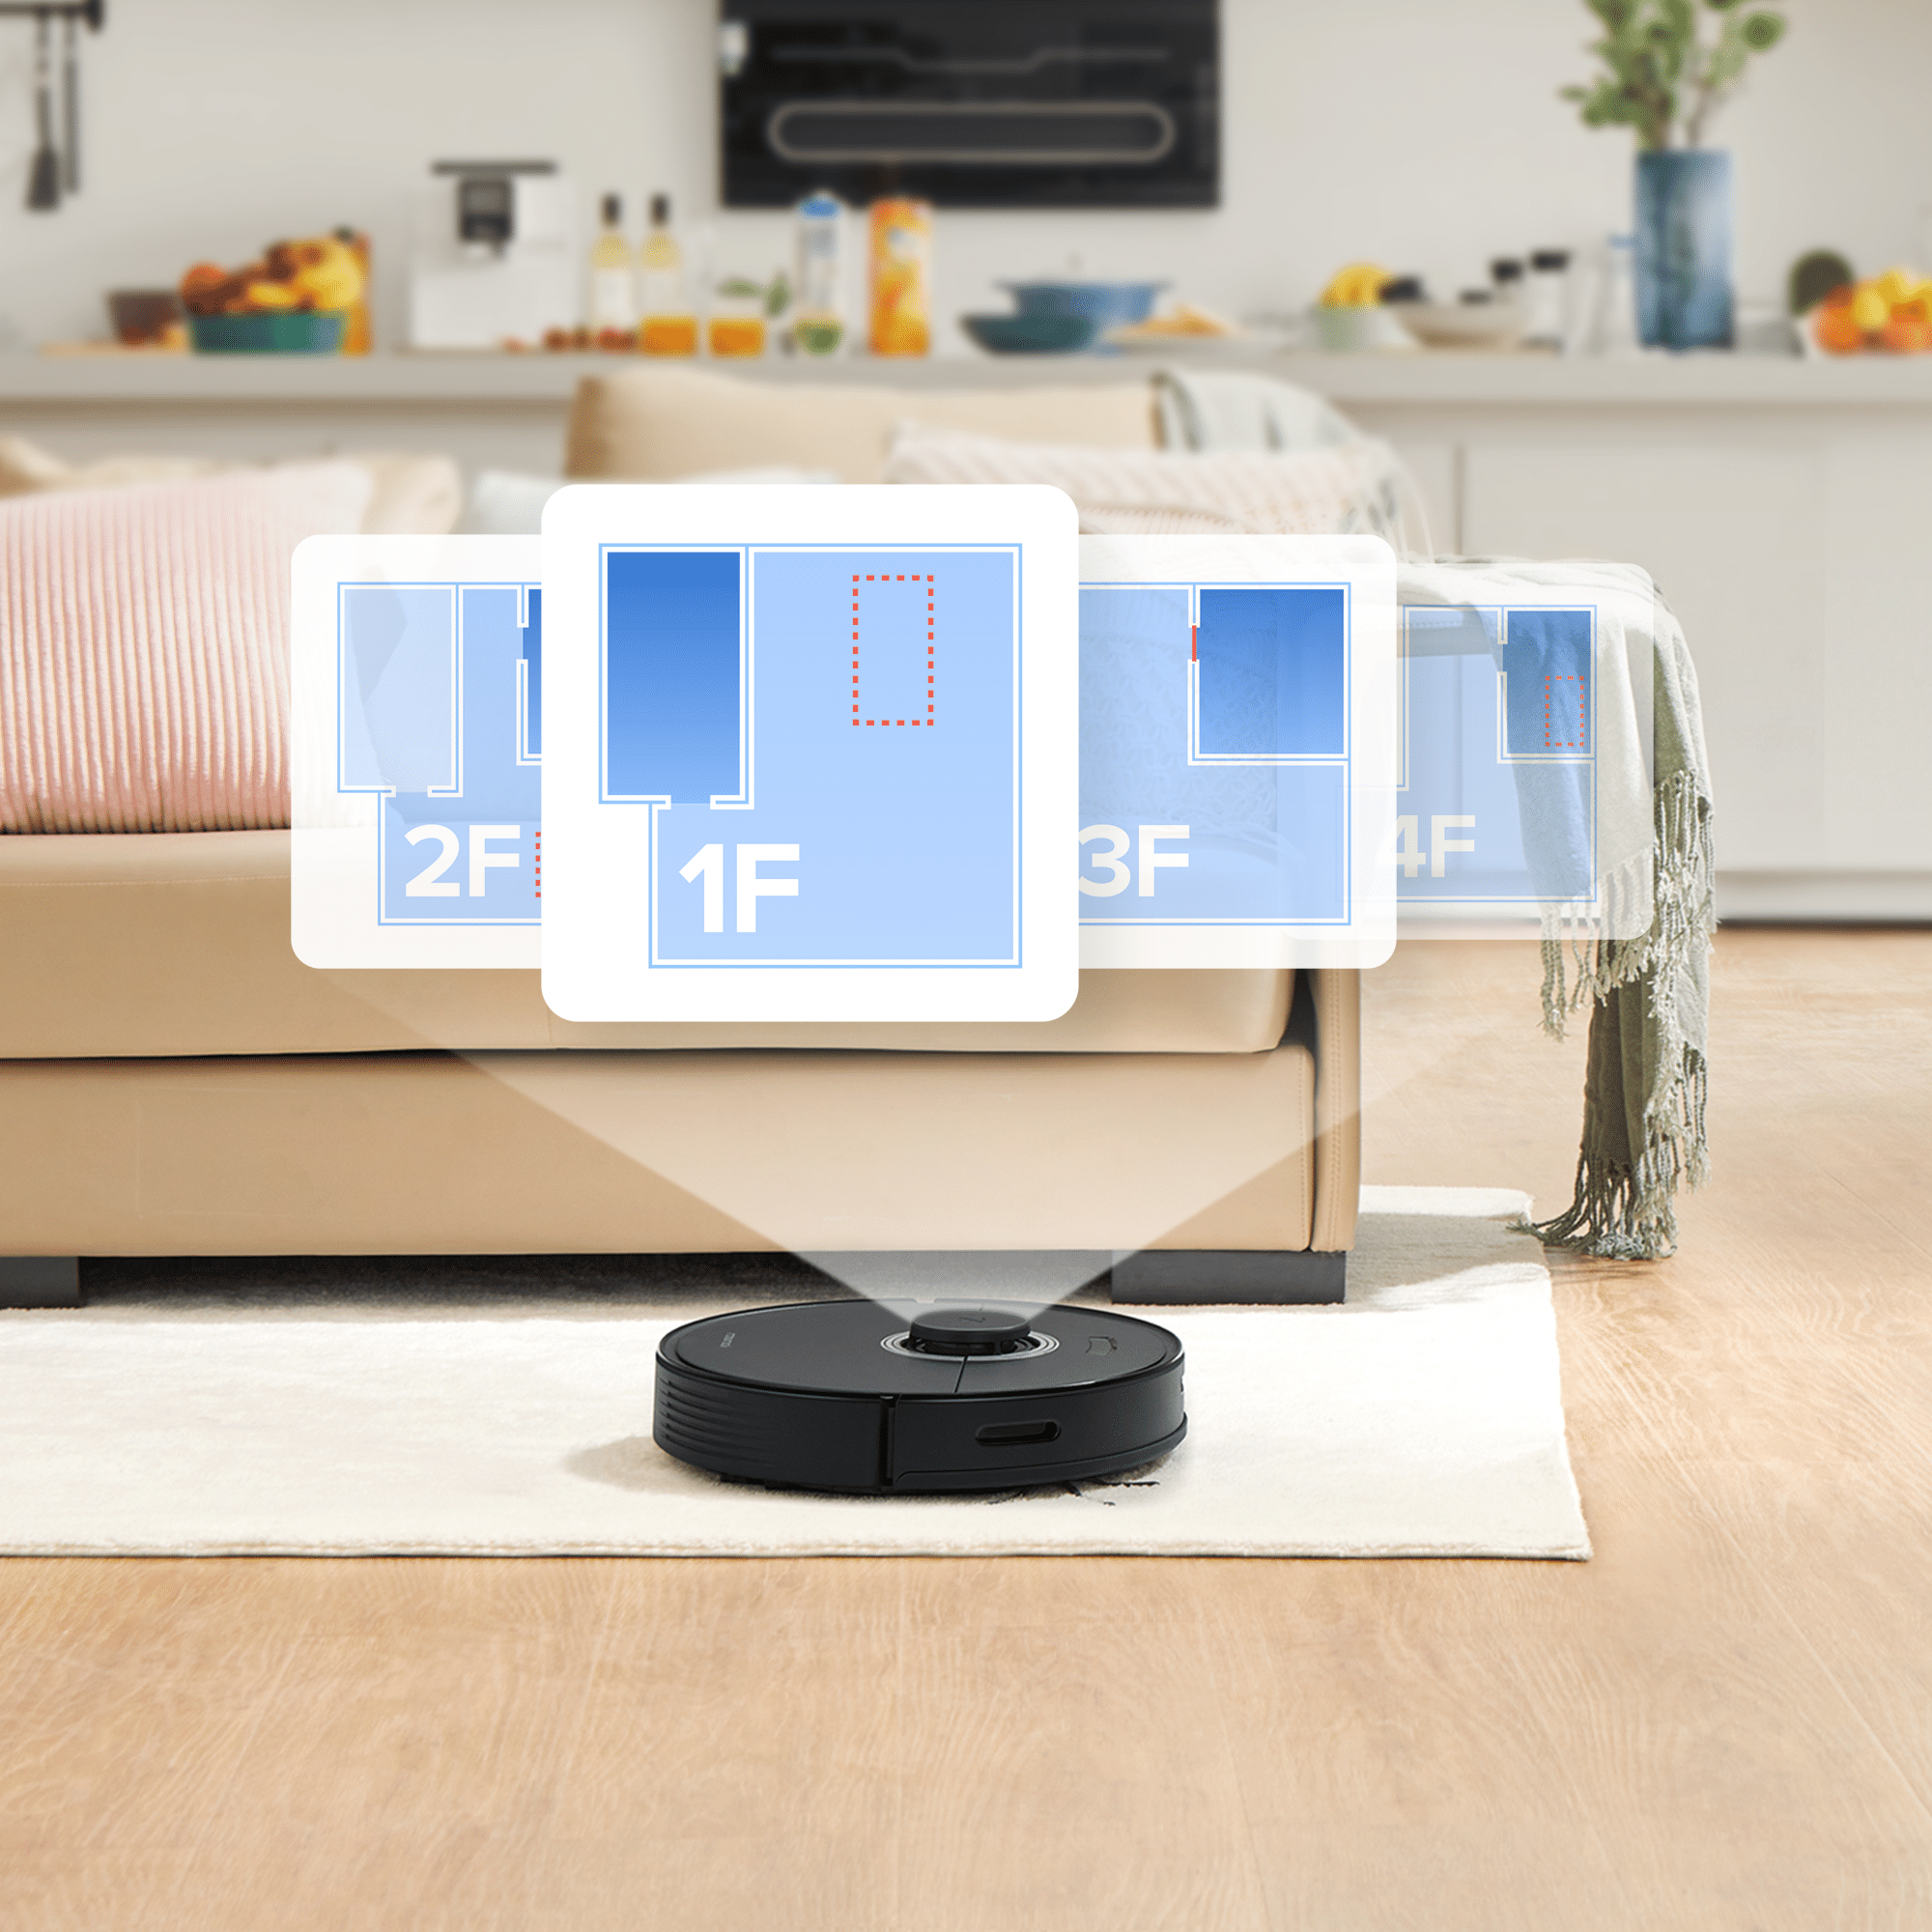 roborock Q7 Max Robot Vacuum and Mop Cleaner, 4200Pa Strong Suction, Lidar  Navigation, Multi-Level Mapping, No-Go&No-Mop Zones, 180mins Runtime, Works